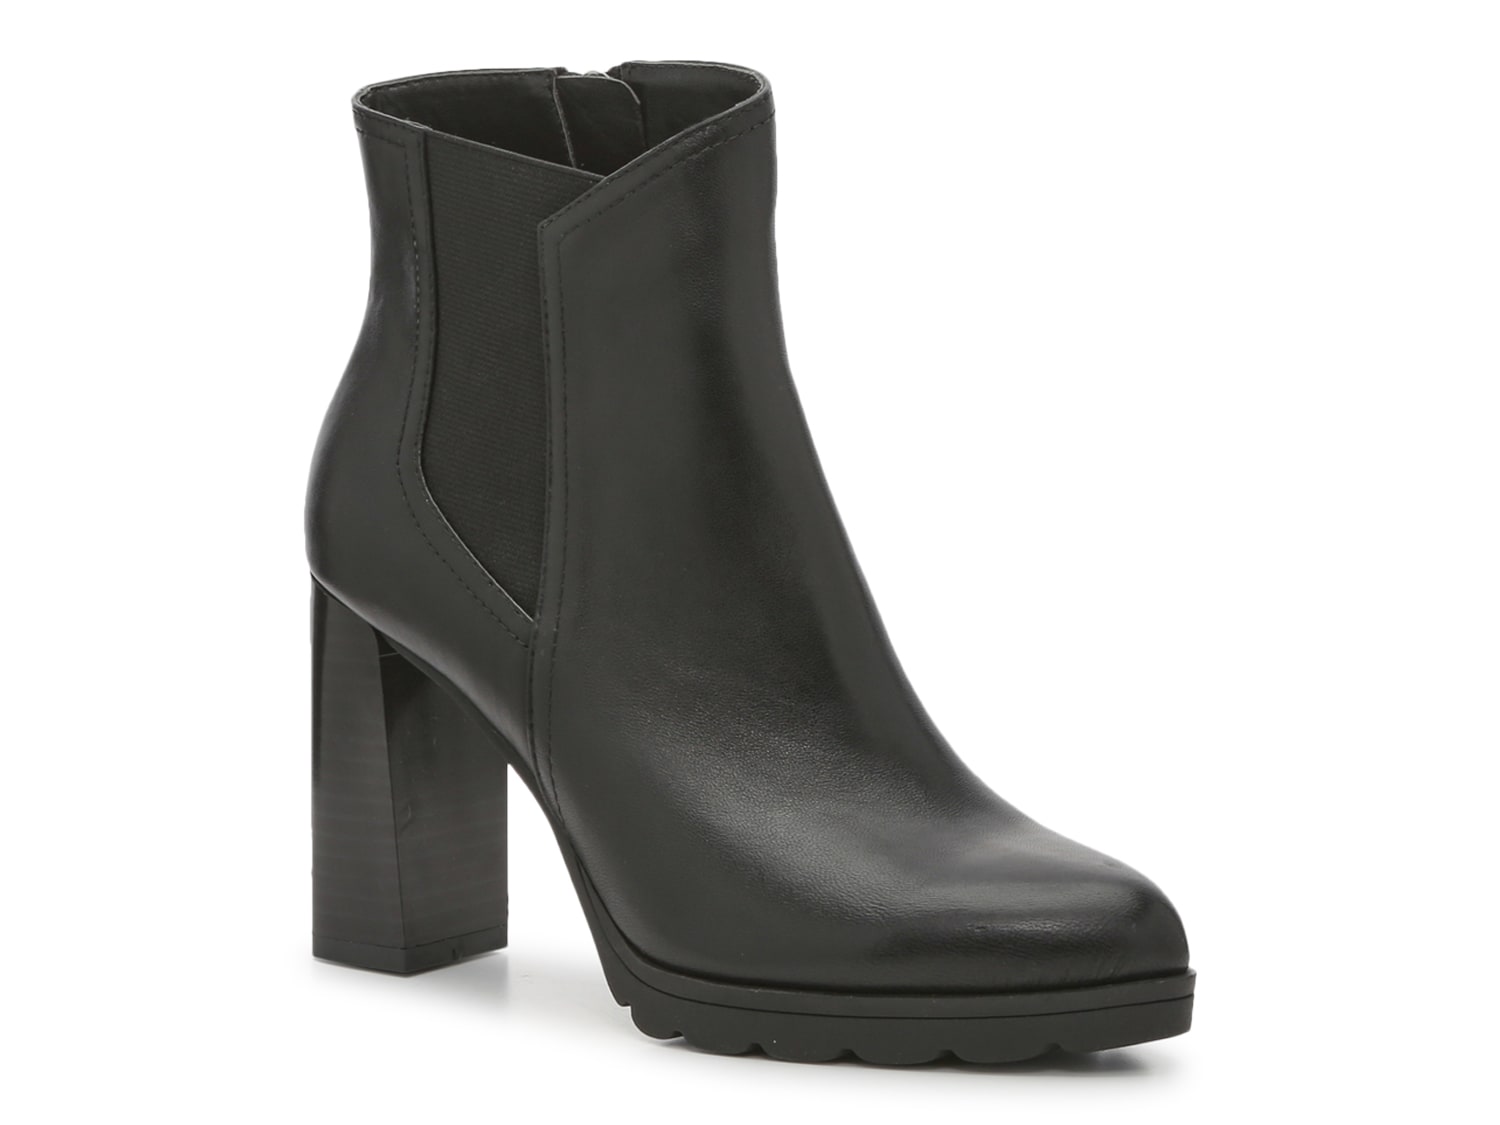 Adrienne Vittadini Noelle Boot - Free Shipping | DSW